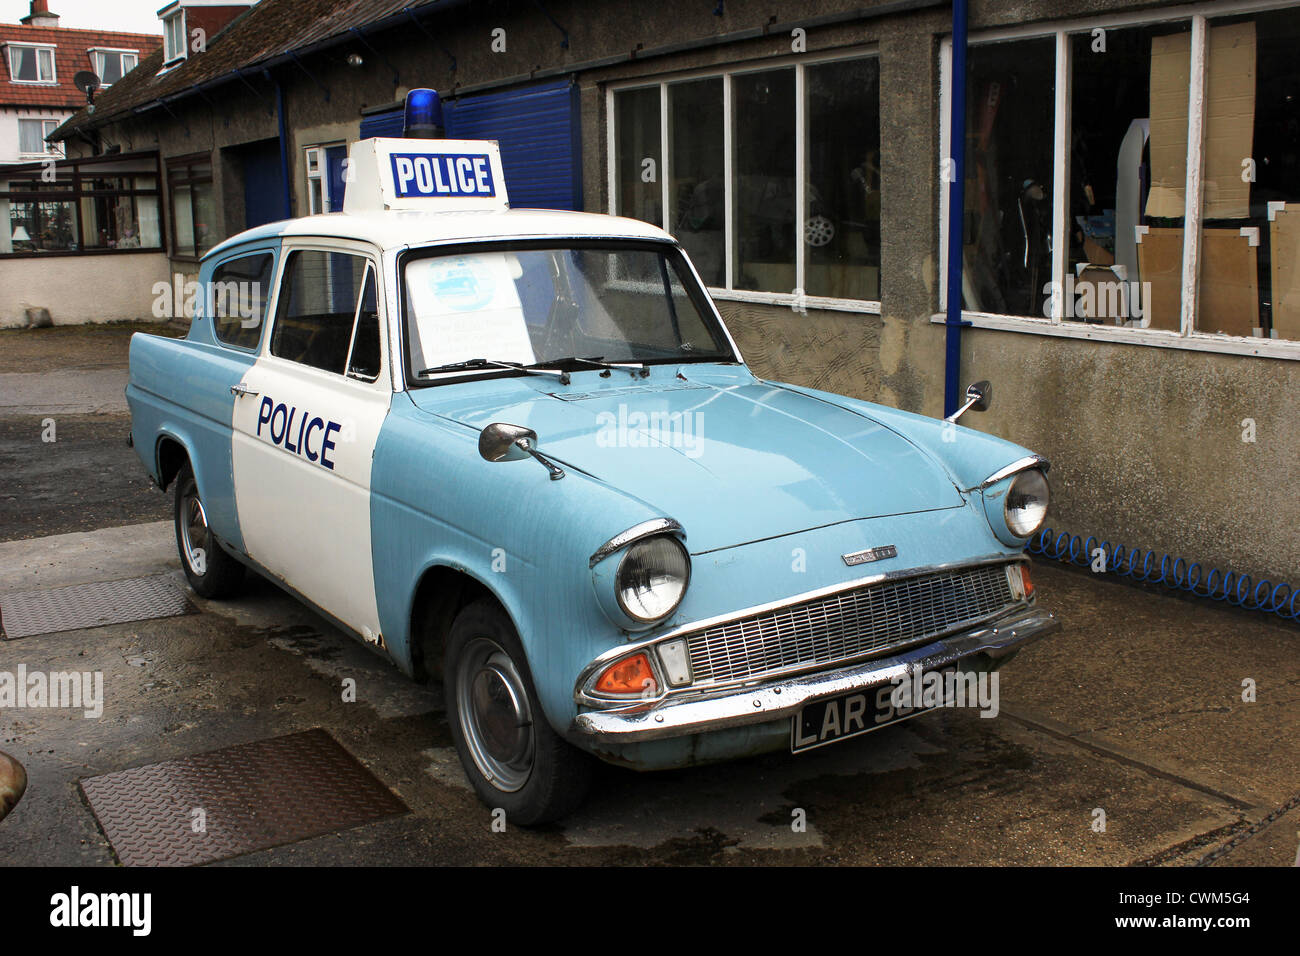 Aidensfield Garage Goathland made famous as a location for TV series Heartbeat  showing police car used in series Stock Photo